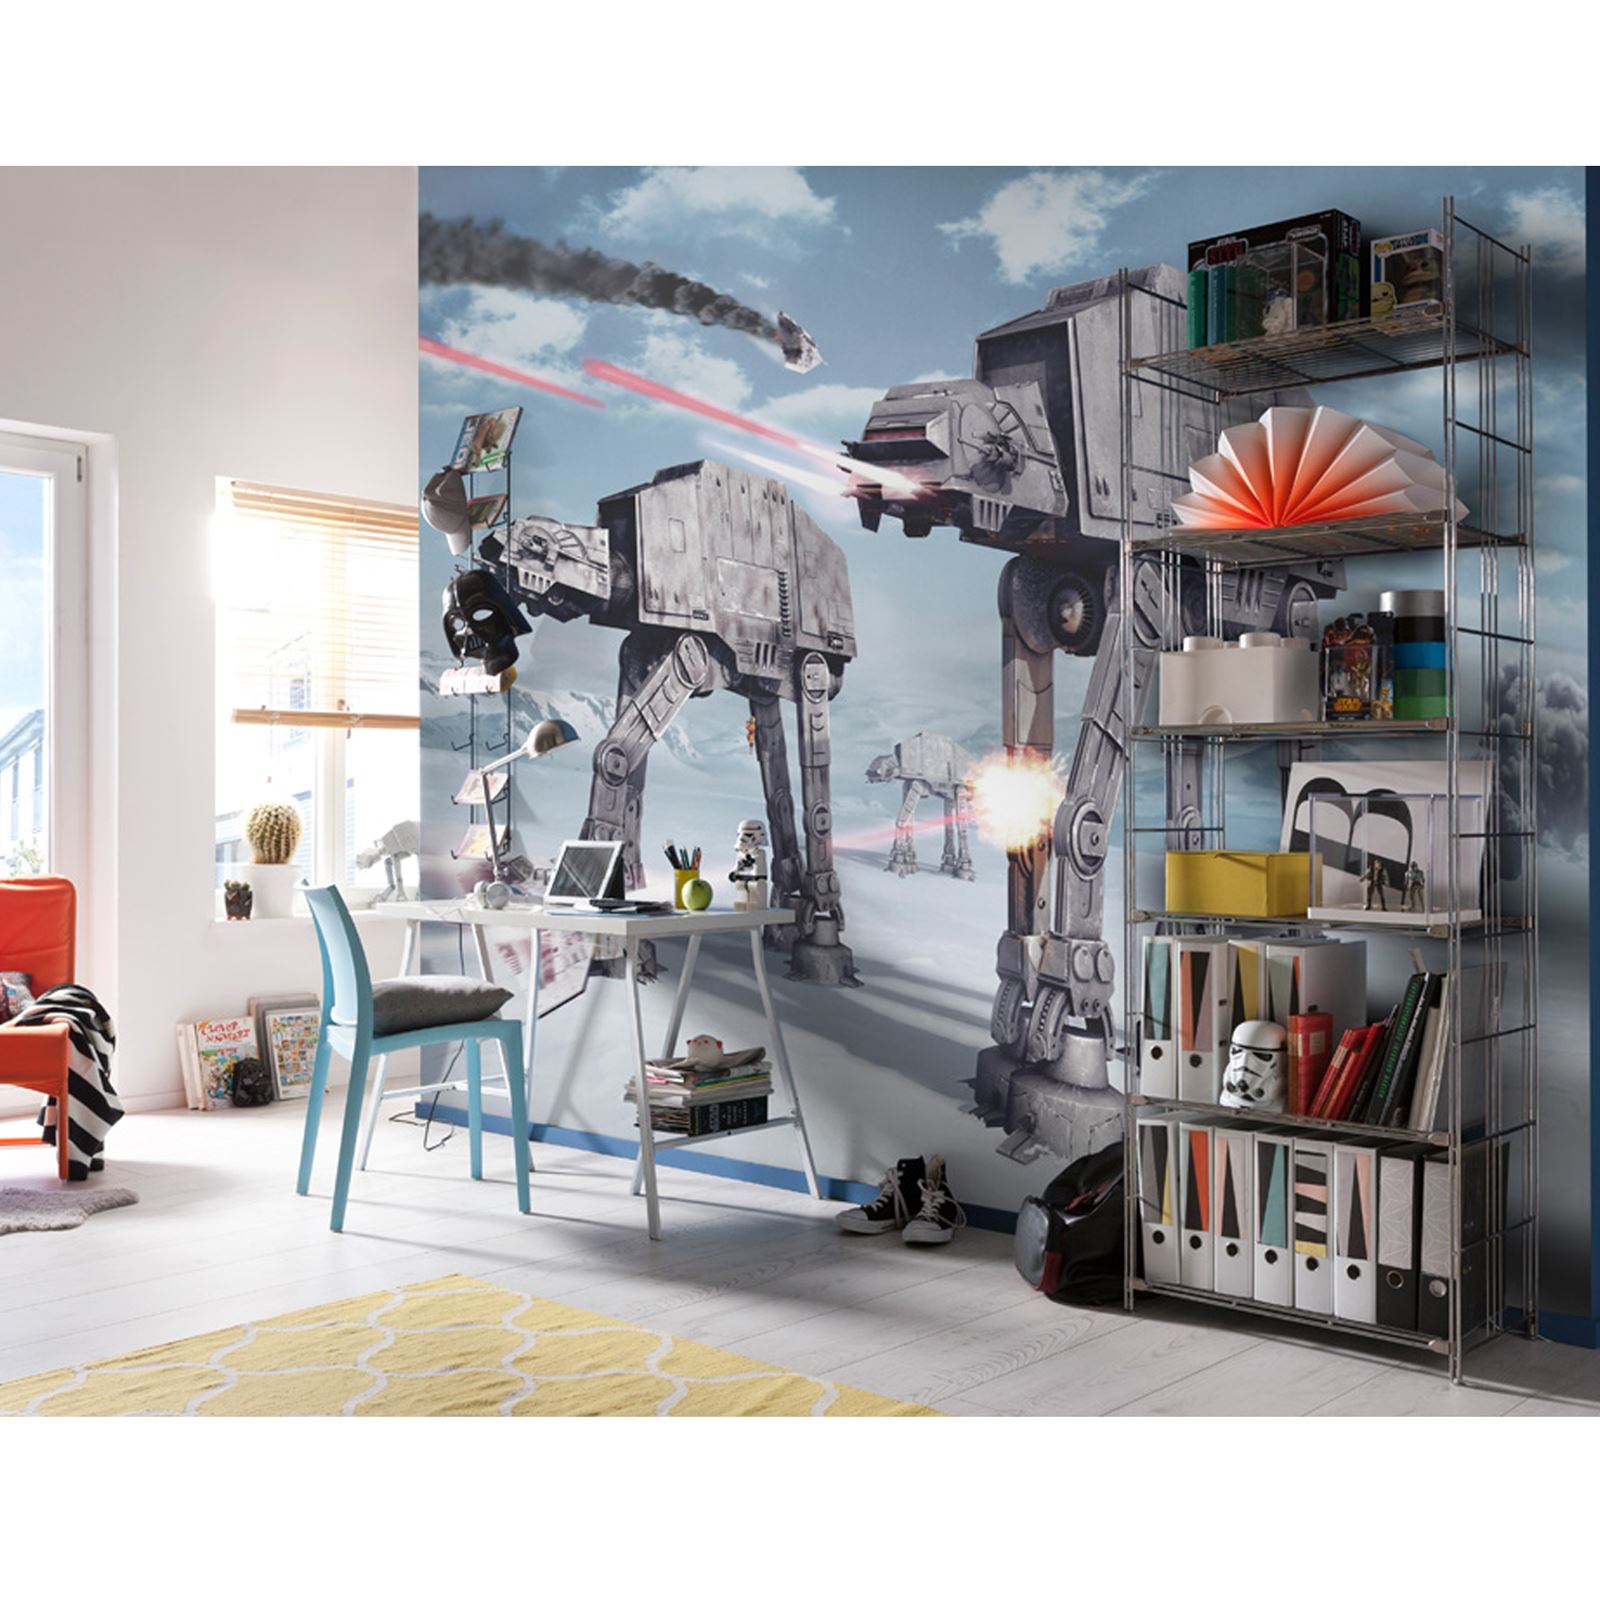 Details About Star Wars Battle Of Hoth Wallpaper Wall Mural 68m X